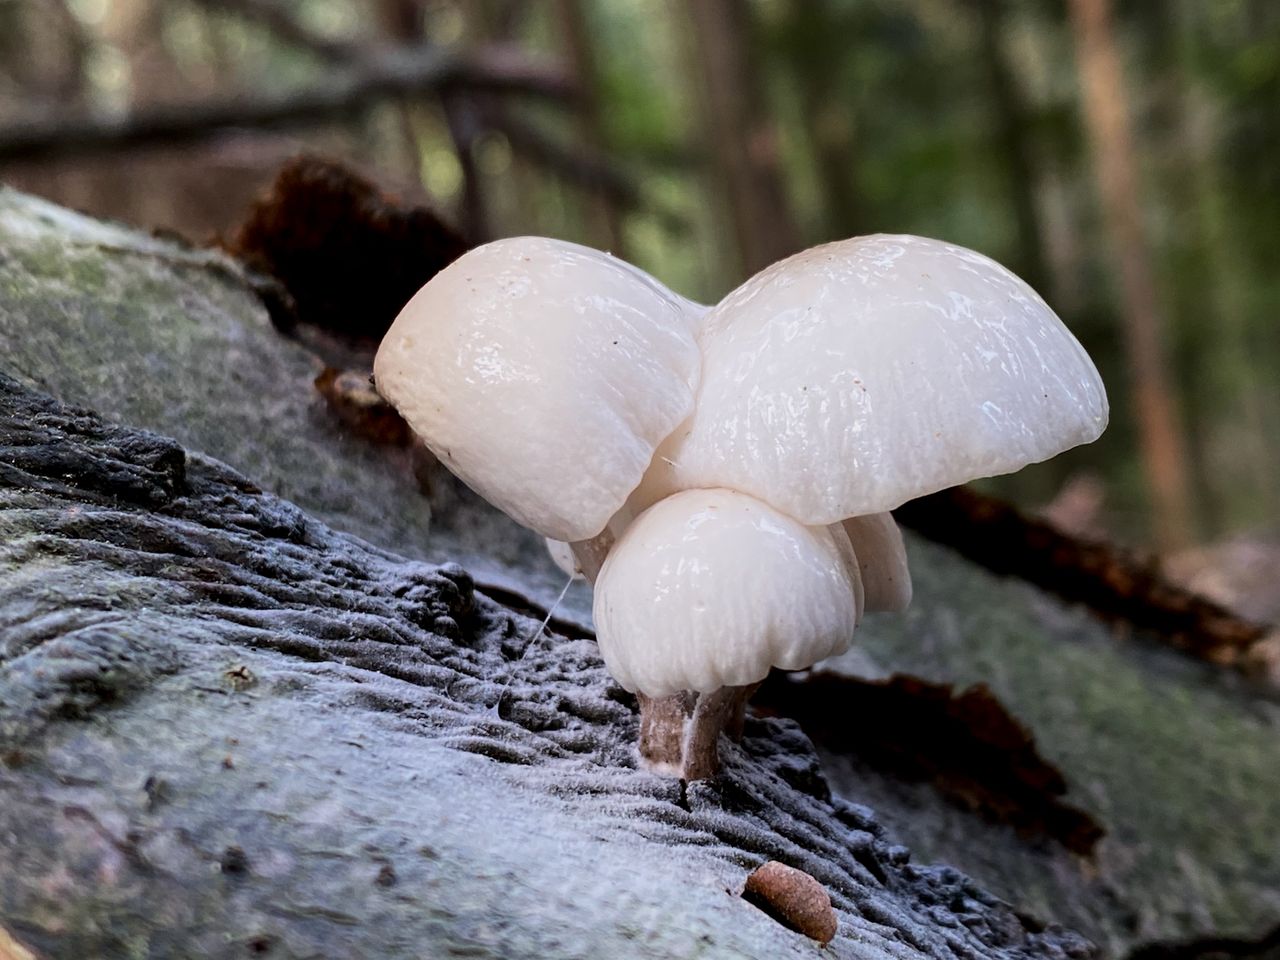 A slimy white mushroom growing out of beechwood.